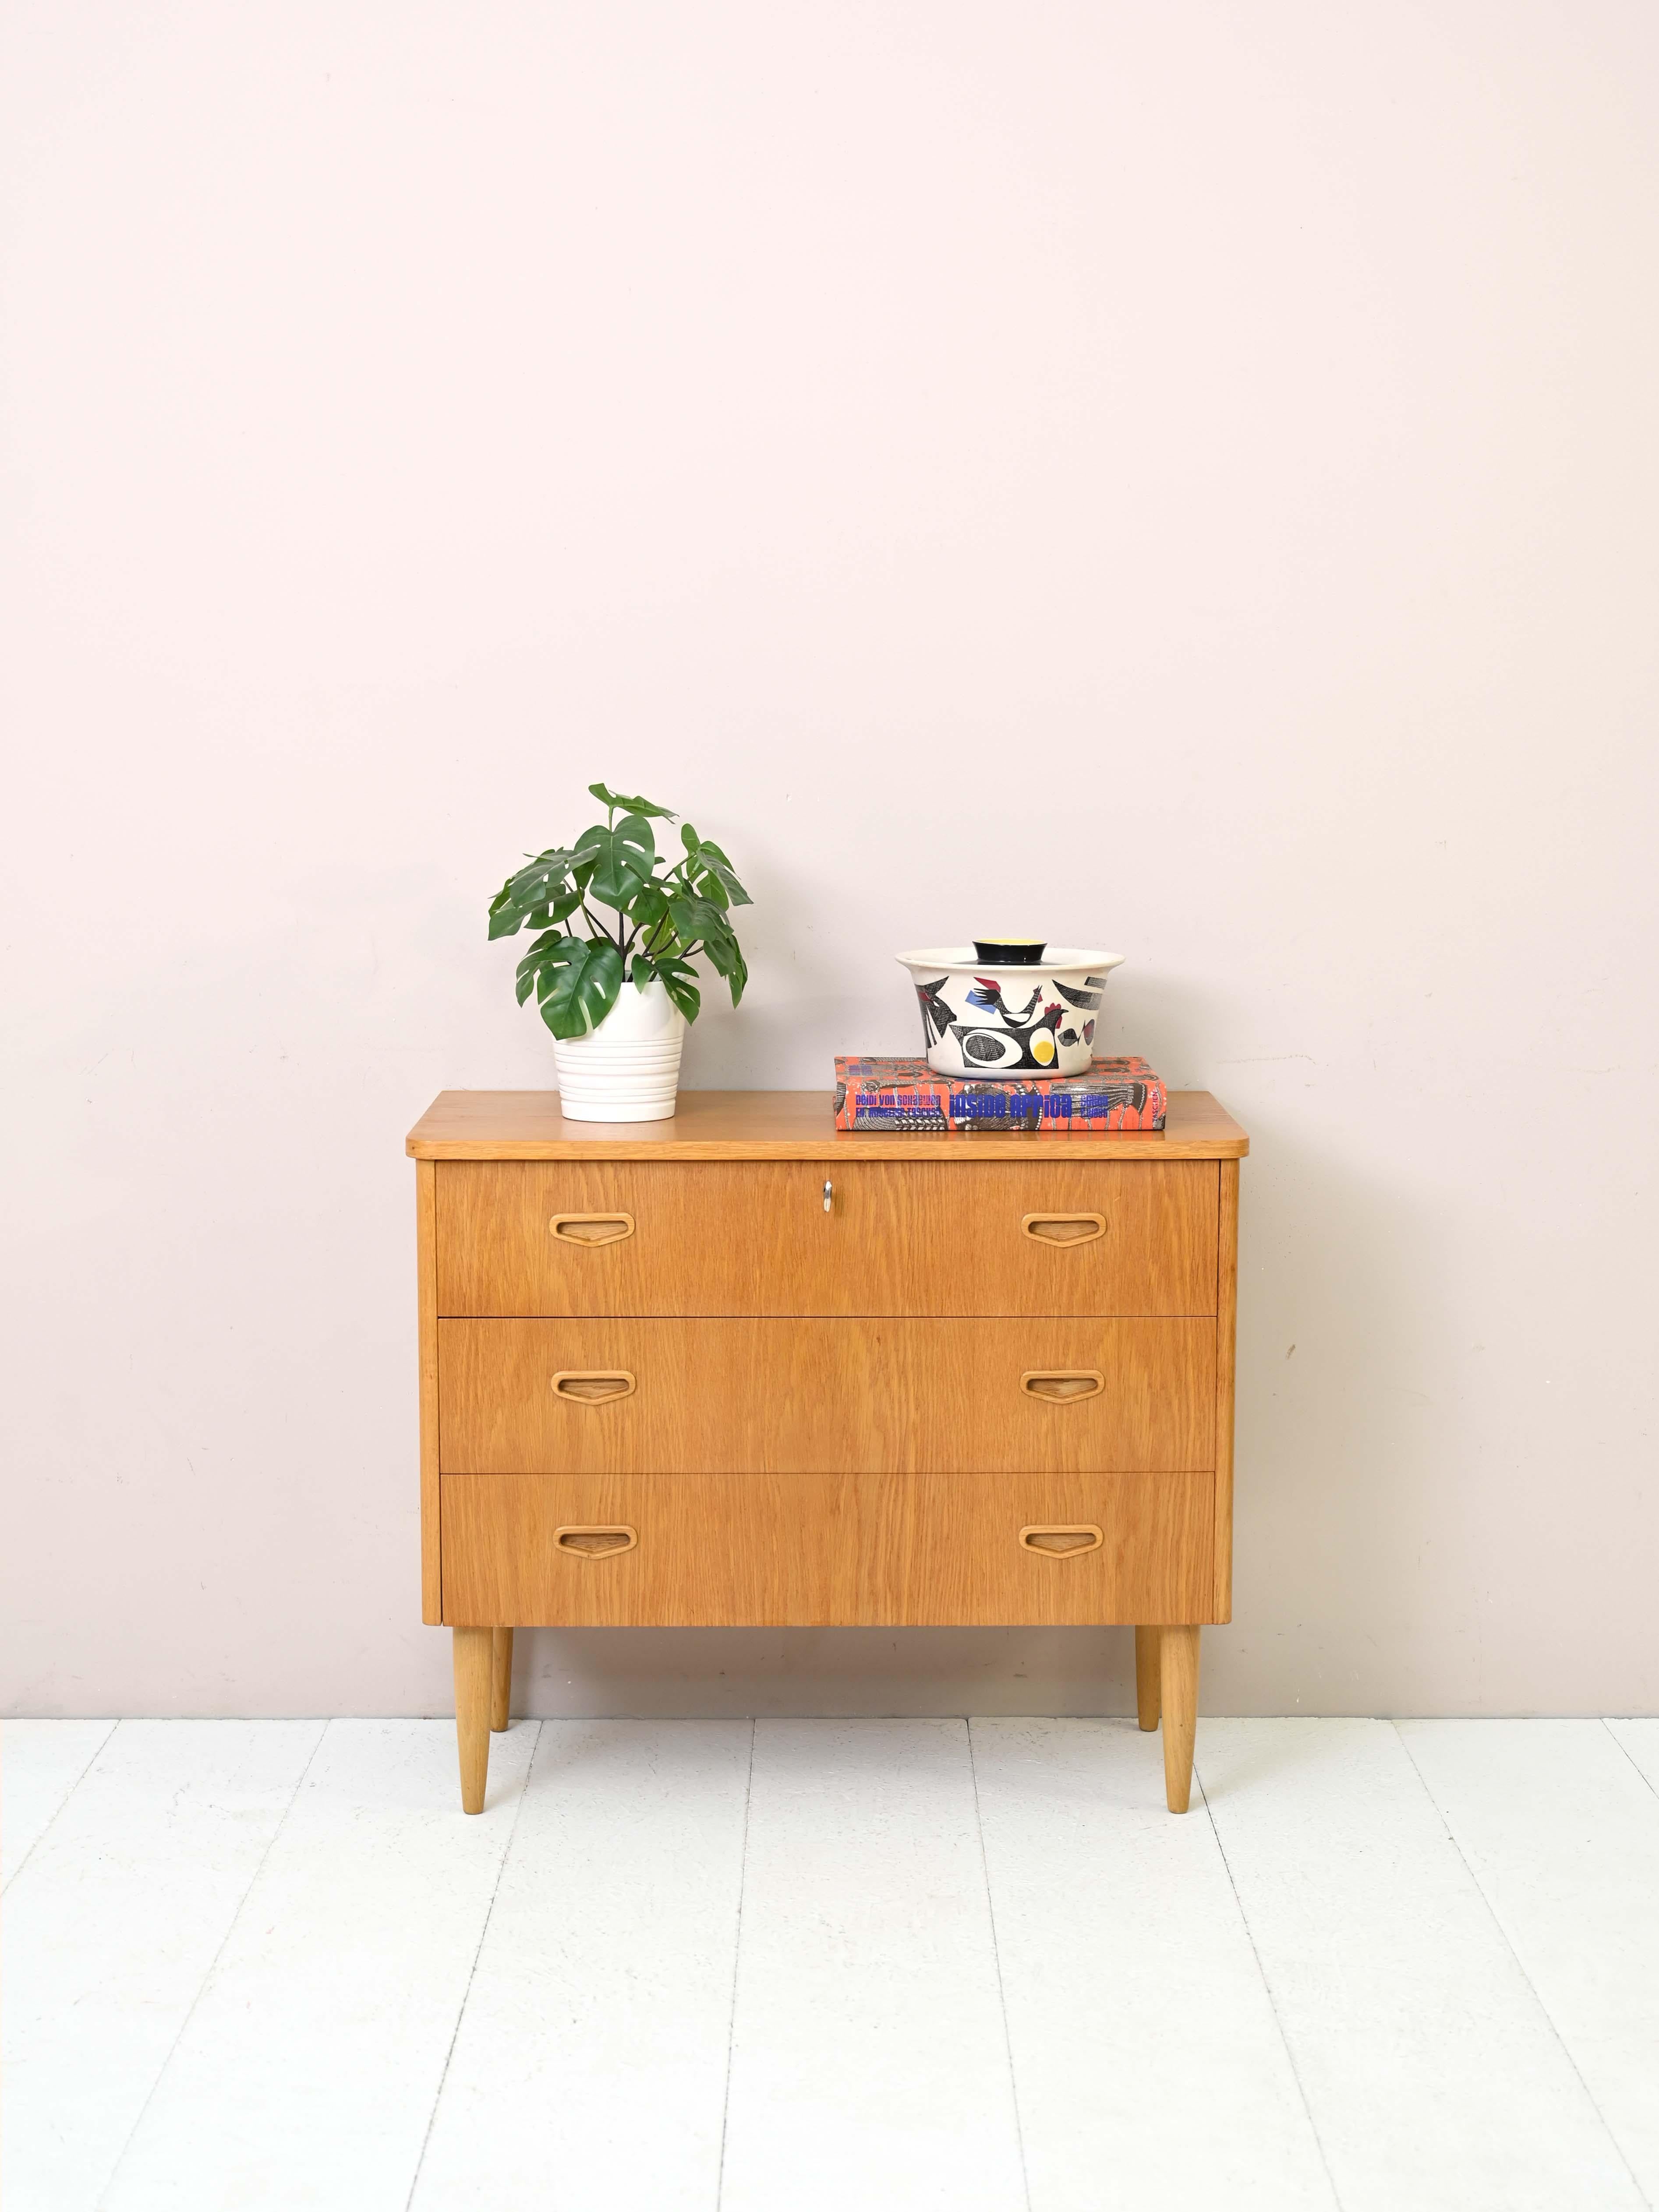 Vintage 1960s cabinet with drawers.
 
This modern-looking chest of drawers traces the Scandinavian taste for simple and functional design. It is characterized by the prevalence of soft lines found in the top with rounded corners, but also in the